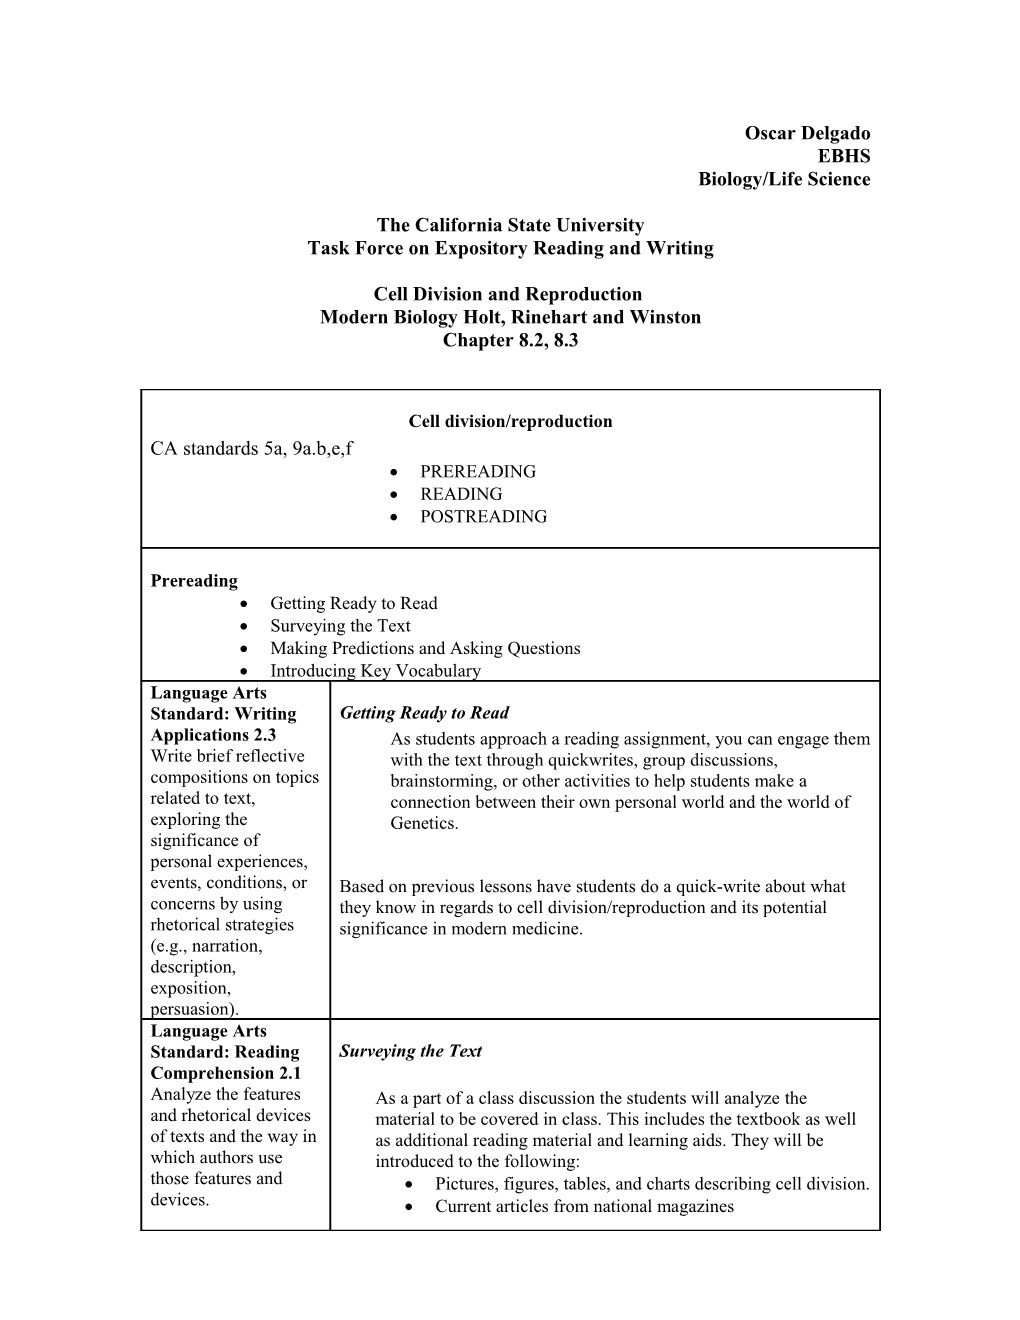 CSU Task Force 12: Expository Reading and Writing s3